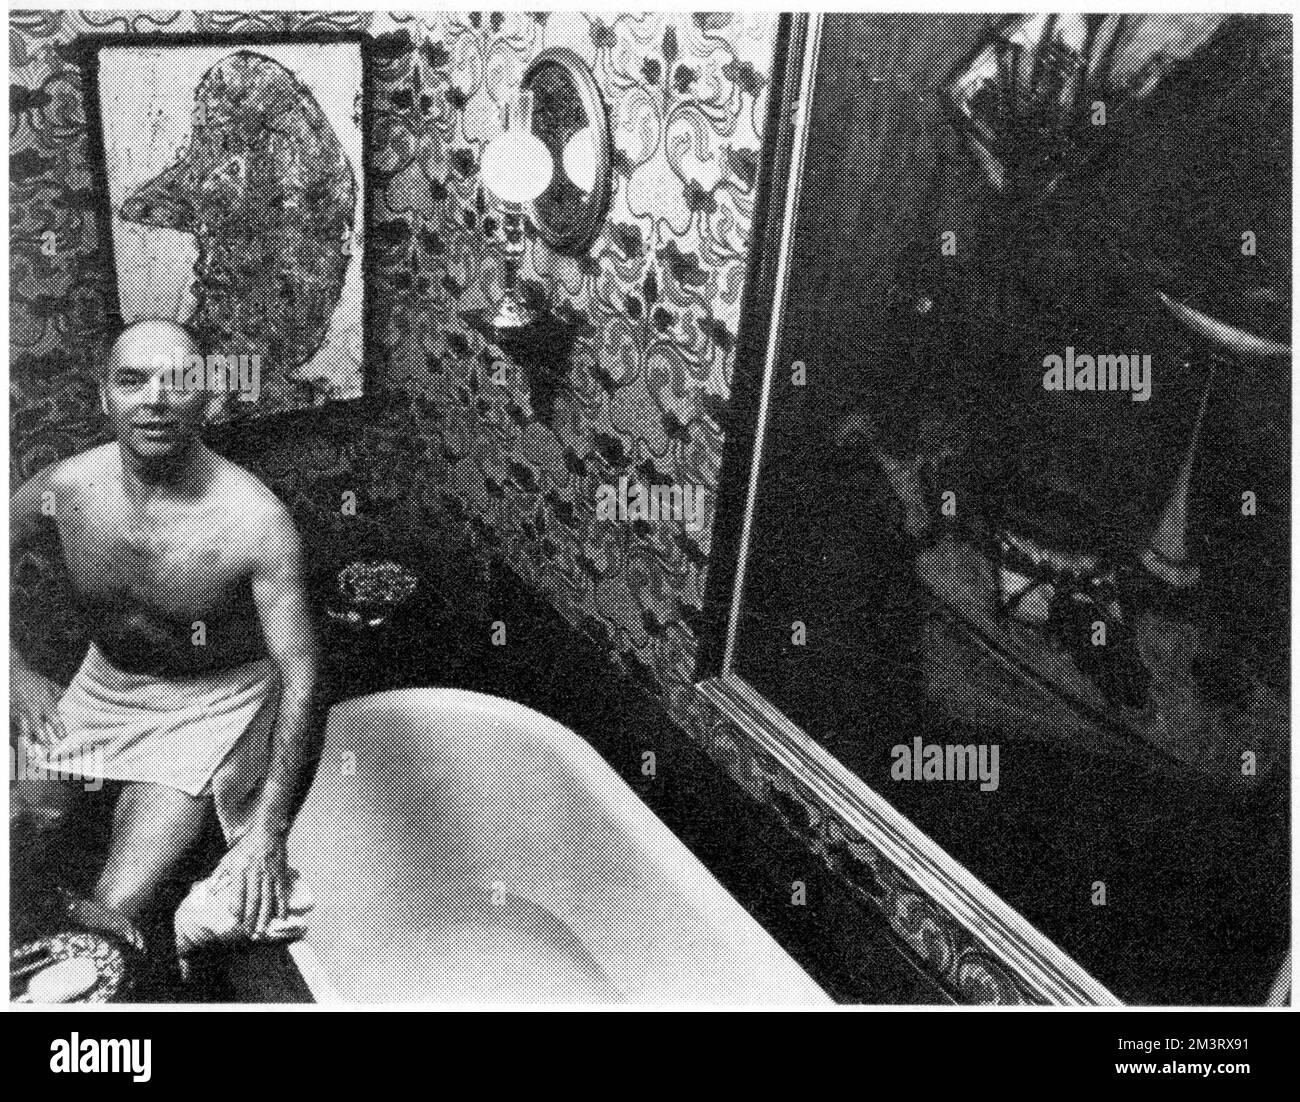 Interior decorator and designer Anthony Denney pictured in his stunning bathroom.  The walls are covered in an art nouveau still patterned cotton, padded behind, and are hung with pictures by Bernard Dubuffet and Edward Burne-Jones.  A porcelain kangaroo offers soap to the bather.     Date: 1966 Stock Photo